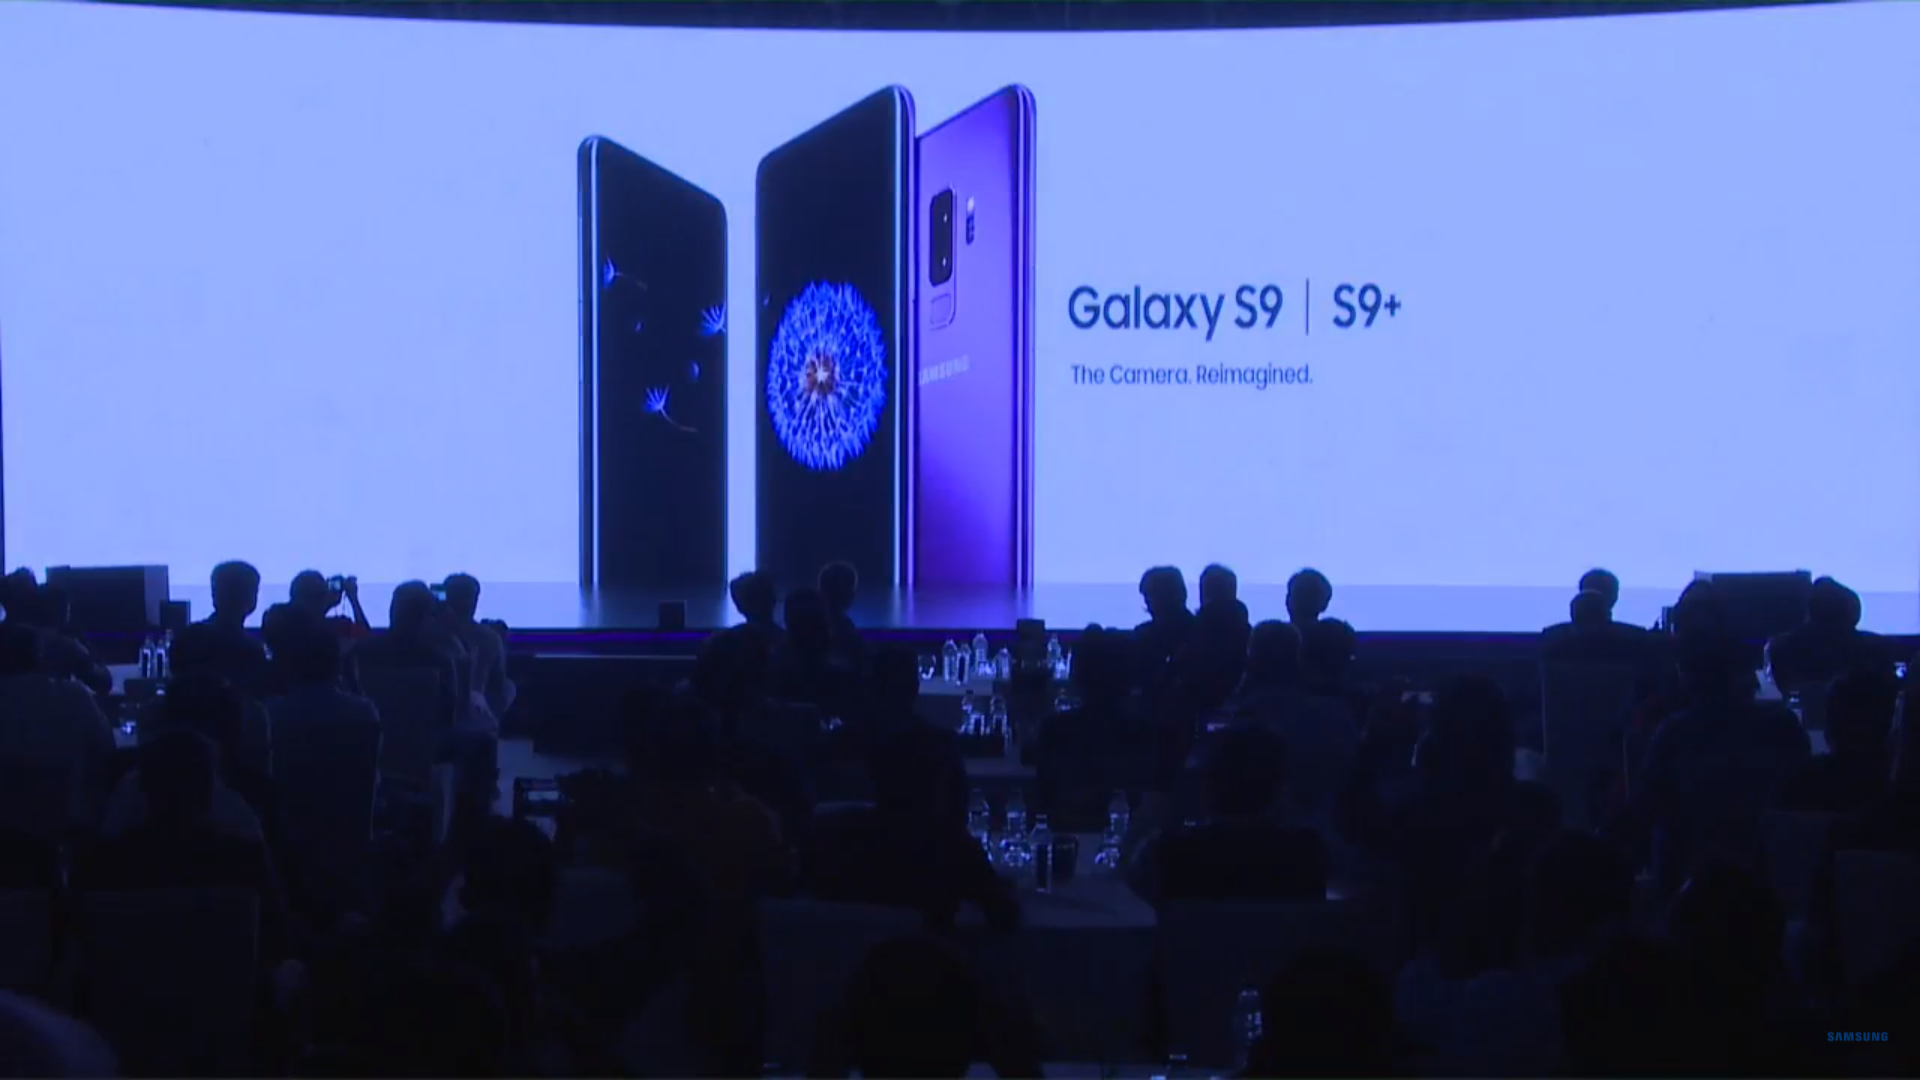 Samsung launches Galaxy S9 and S9+ in India, starts at Rs. 57,900 2